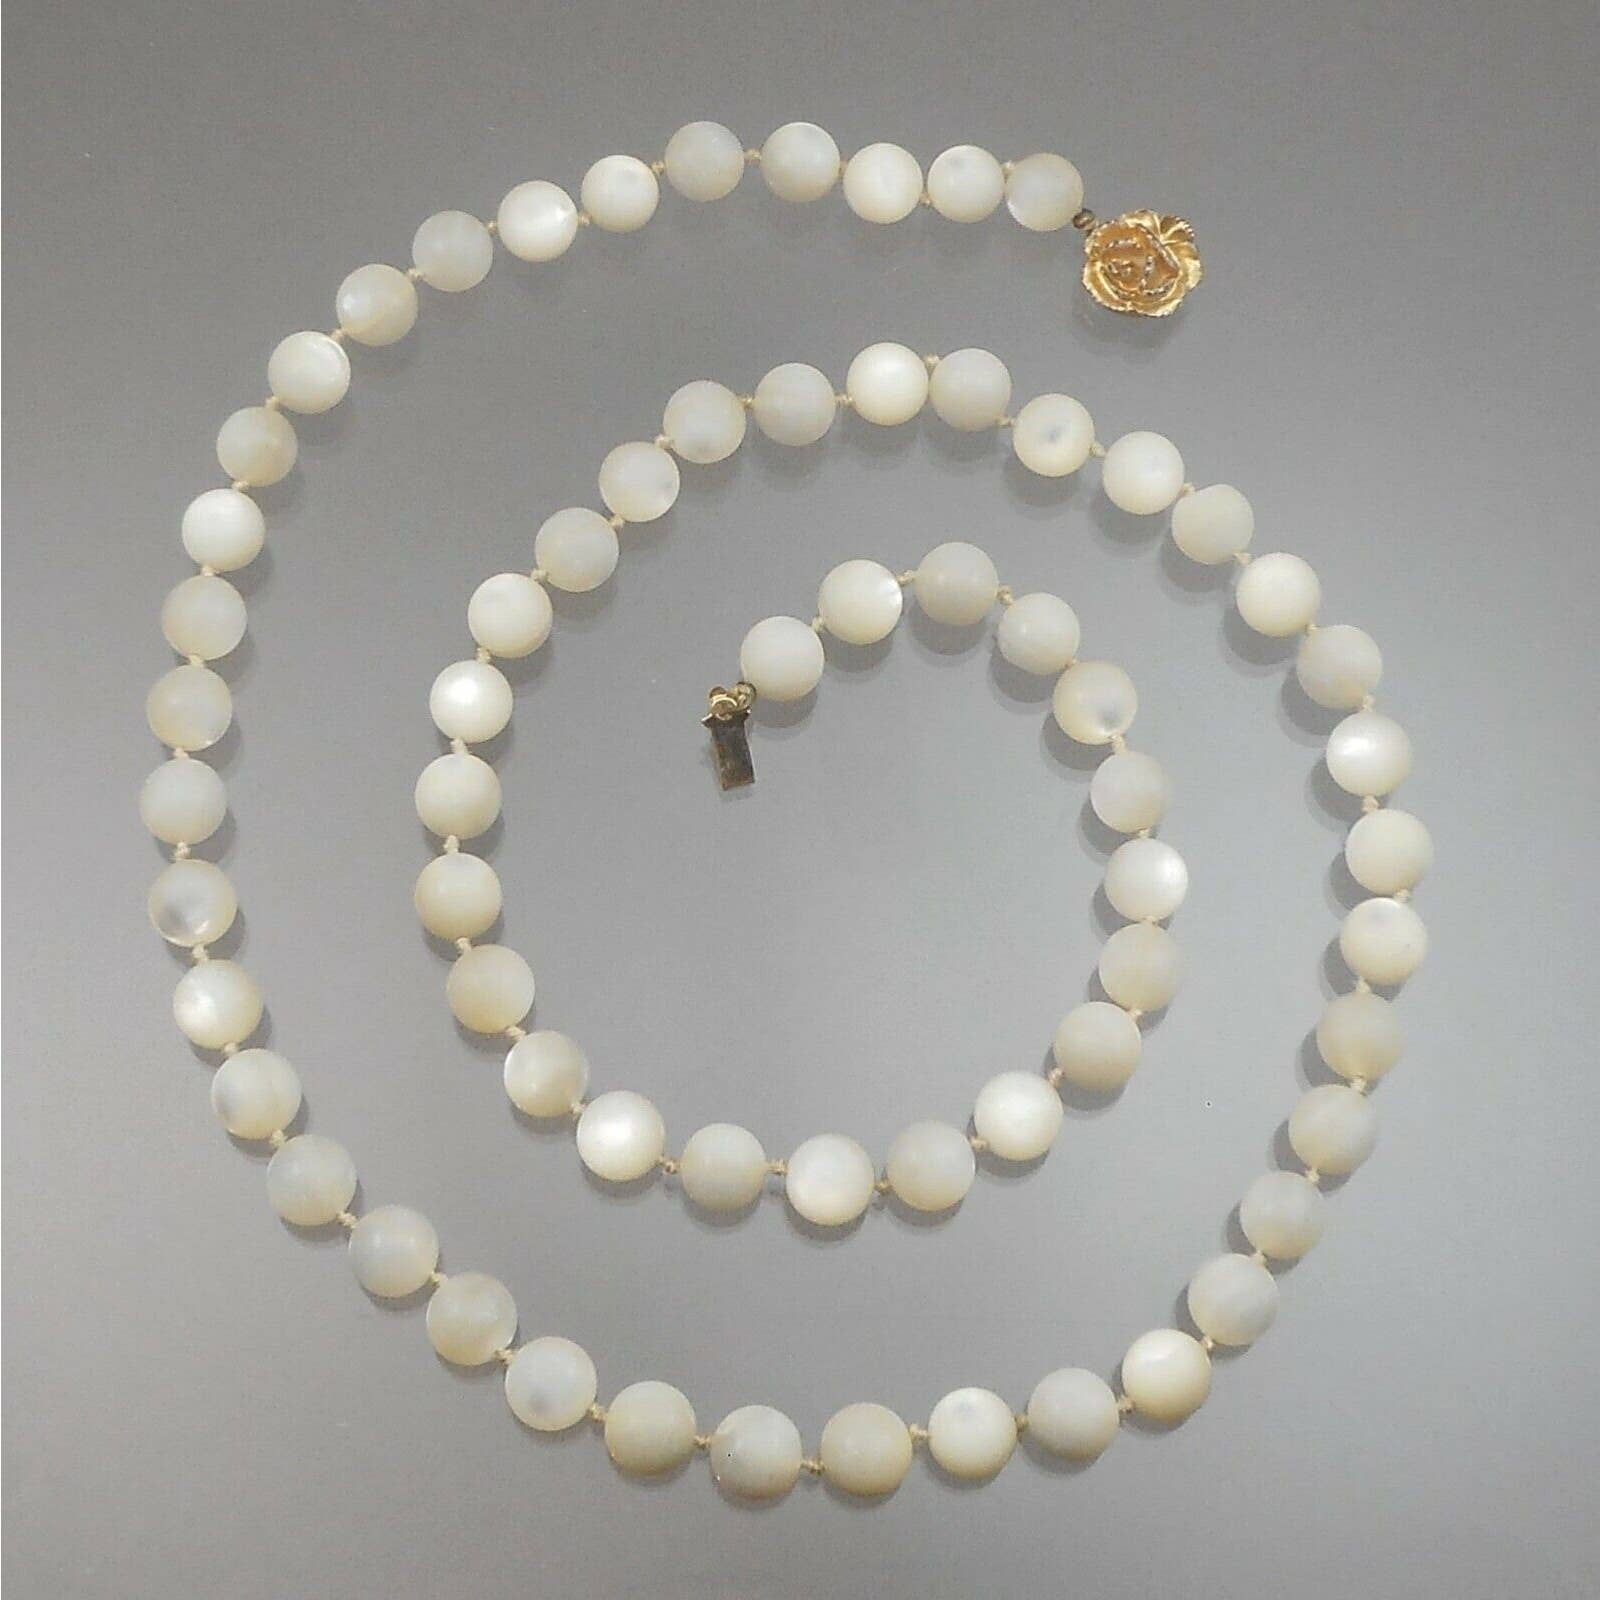 Pearl Bead Necklaces 1950's Lot of 6 Vintage Fake Pearls